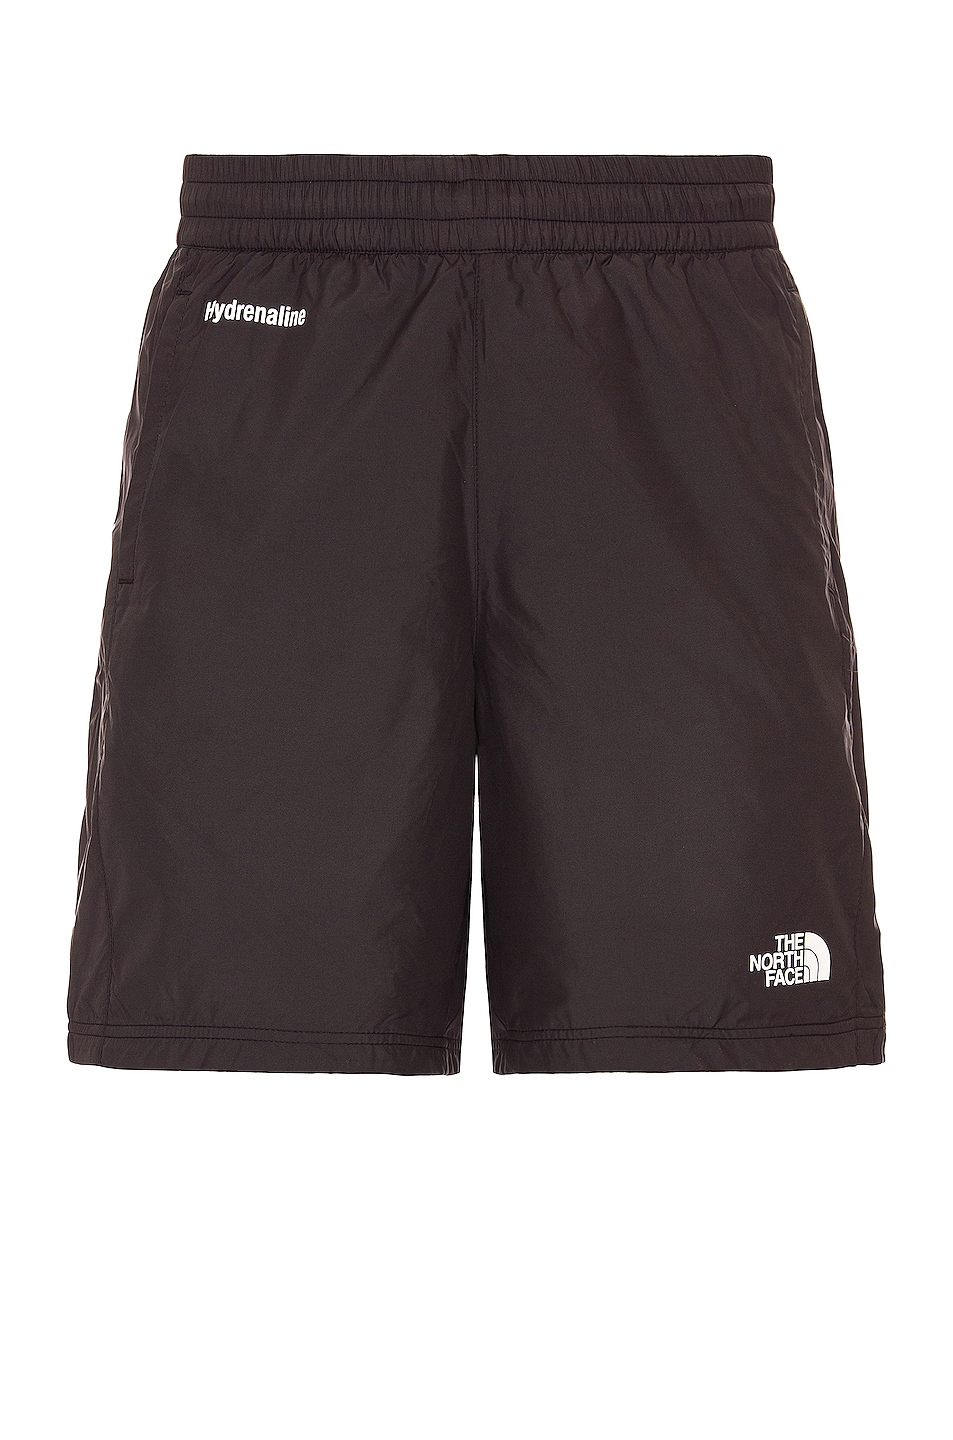 Image 1 of The North Face Hydrenaline Short 2000 in Black